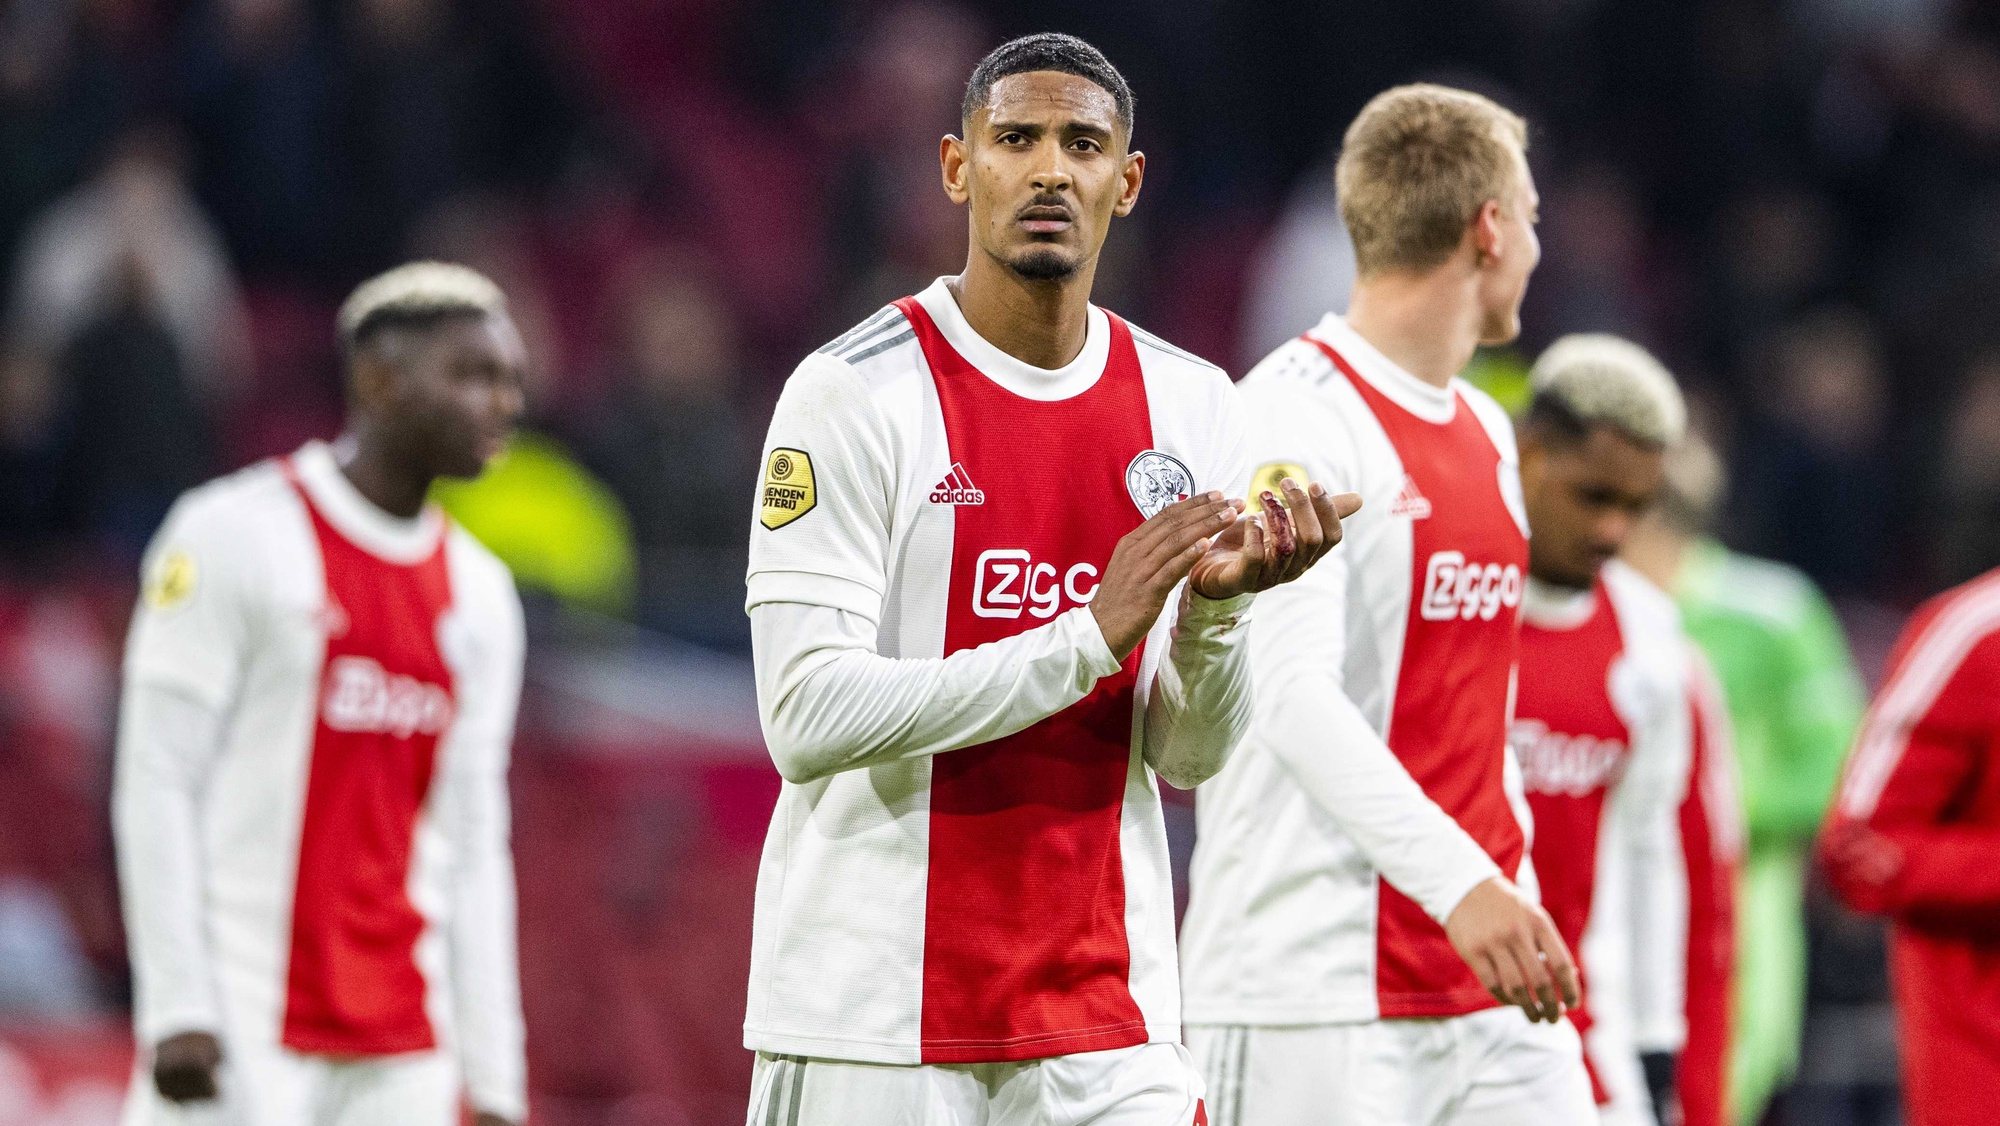 epa09570572 Sebastien Haller of Ajax greets supporters at the end of the Dutch Eredivisie soccer match between Ajax Amsterdam and Go Ahead Eagles at the Johan Cruijff ArenA  in Amsterdam, Netherlands, 07 November 2021.  EPA/OLAF KRAAK